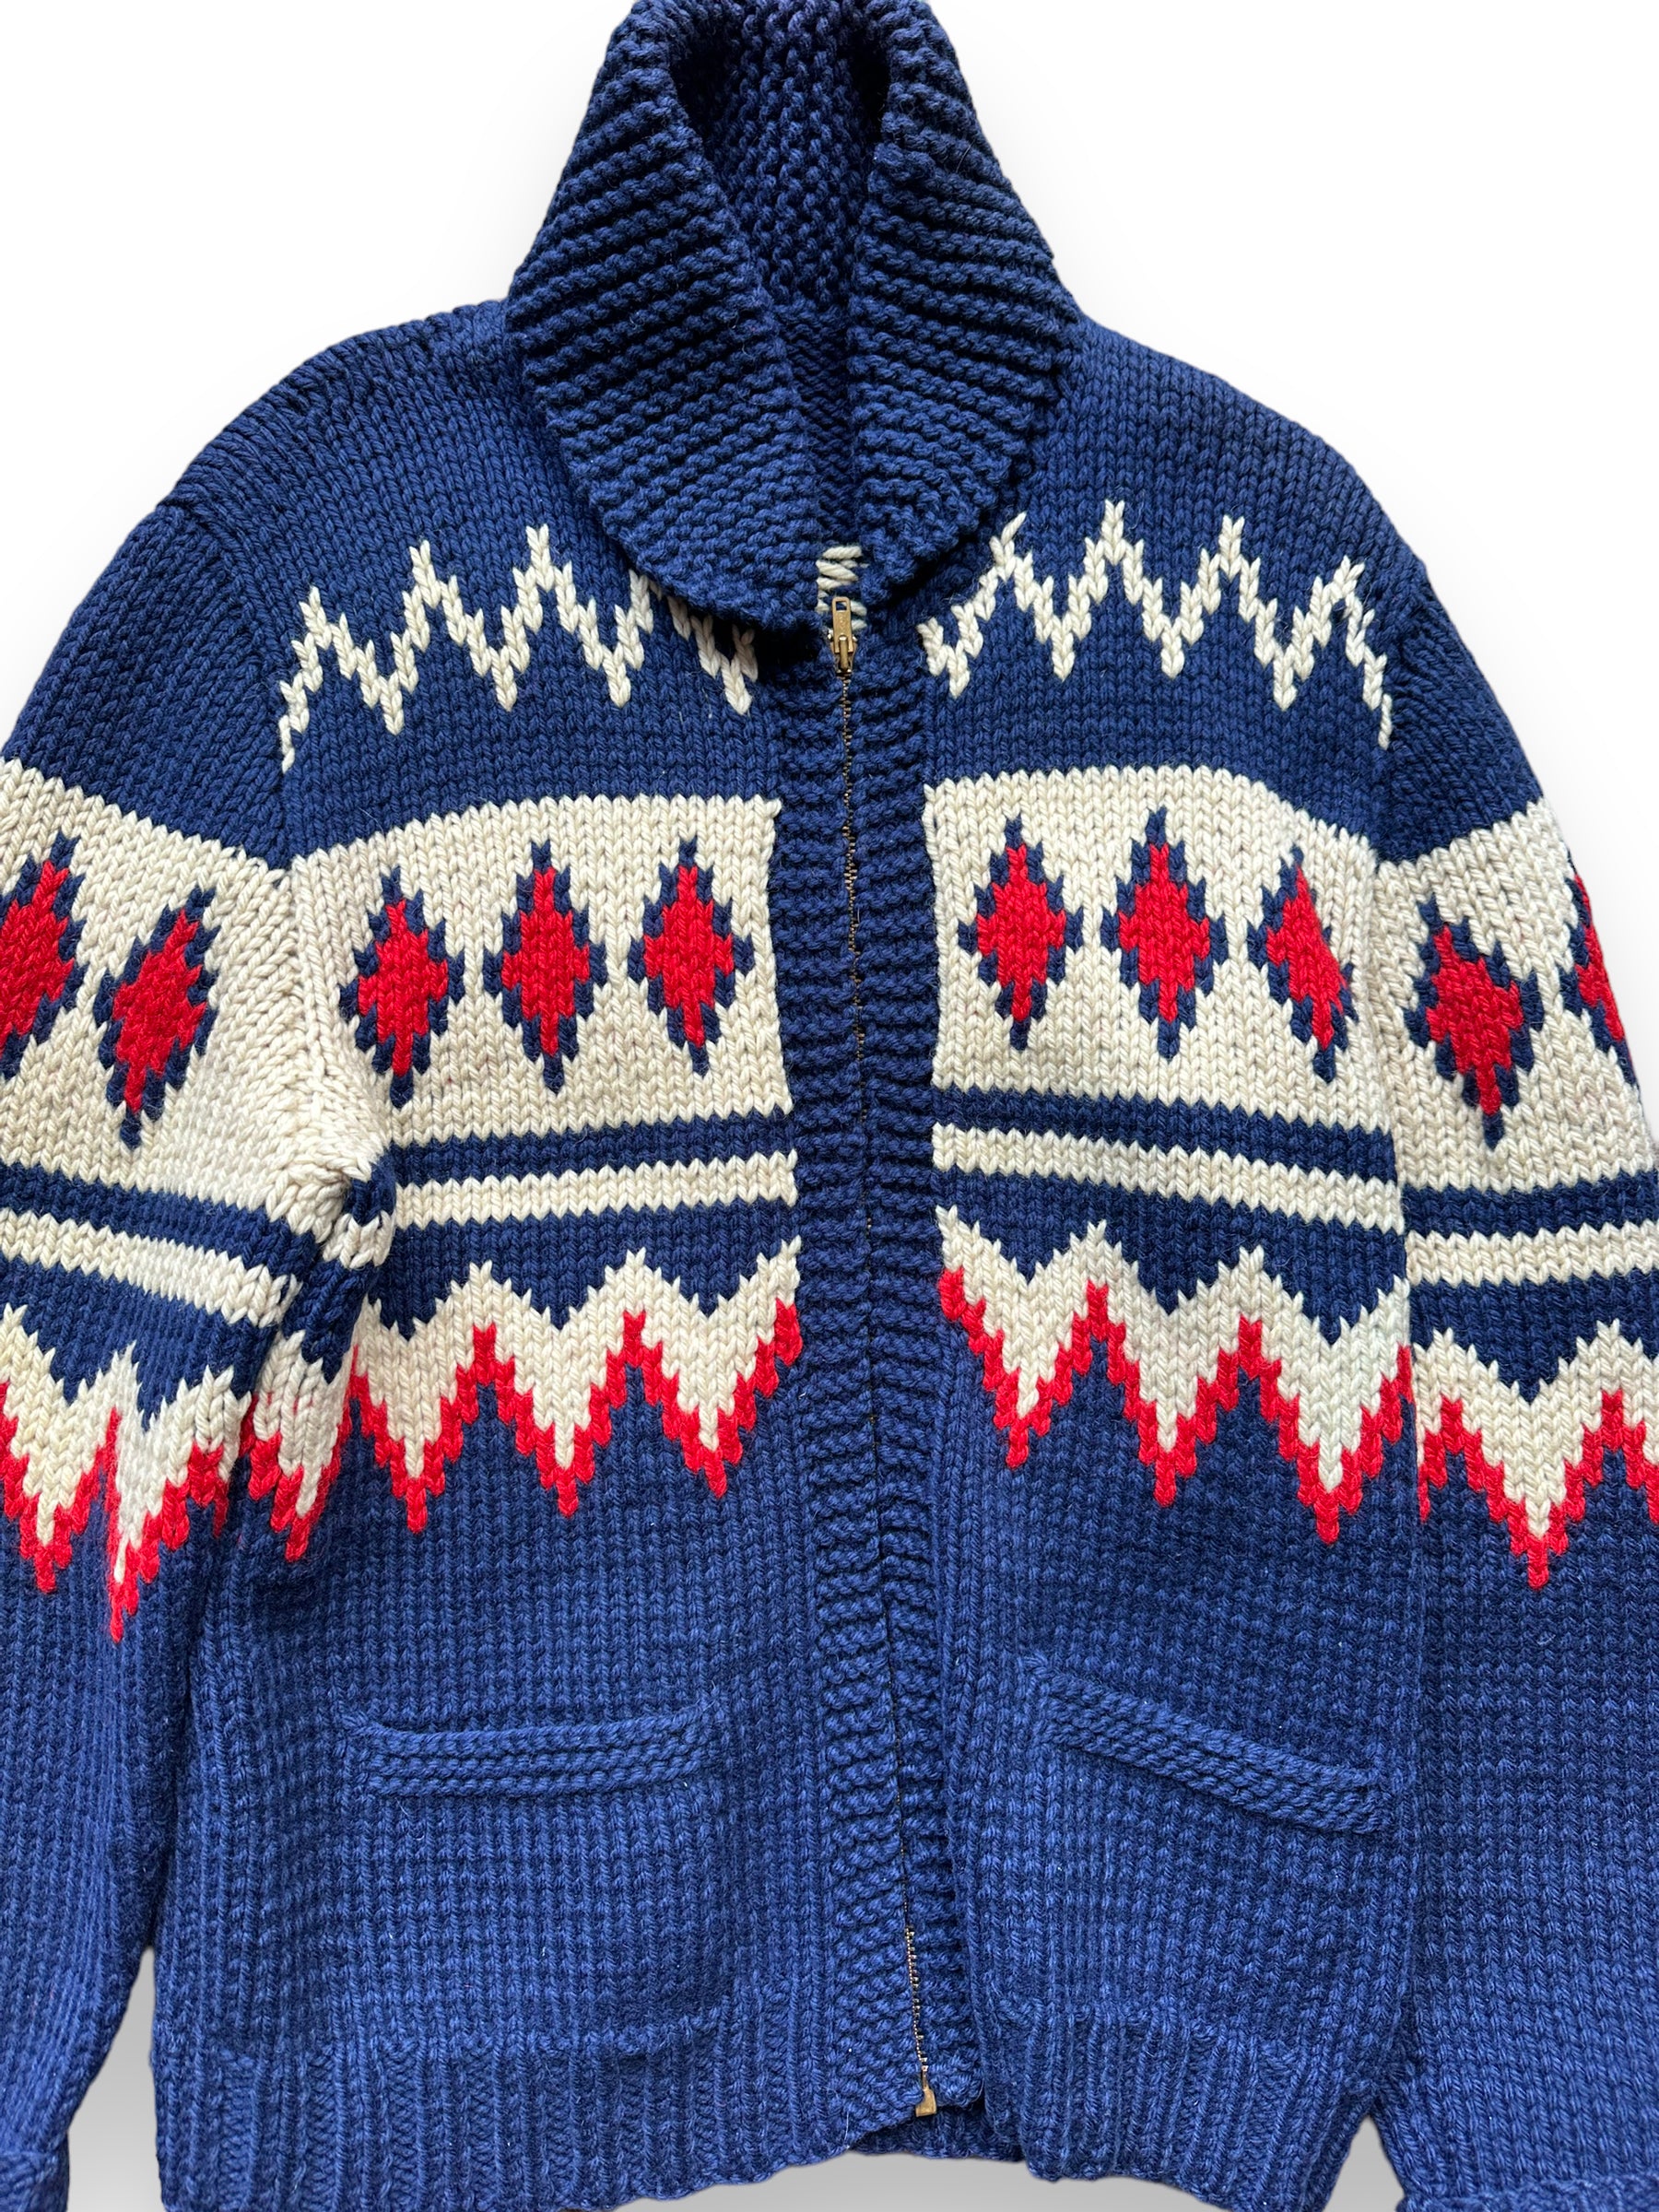 Front Detail of Vintage Cowichan Style Blue & Red Sweater SZ M  |  Barn Owl Vintage | Seattle Vintage Sweaters